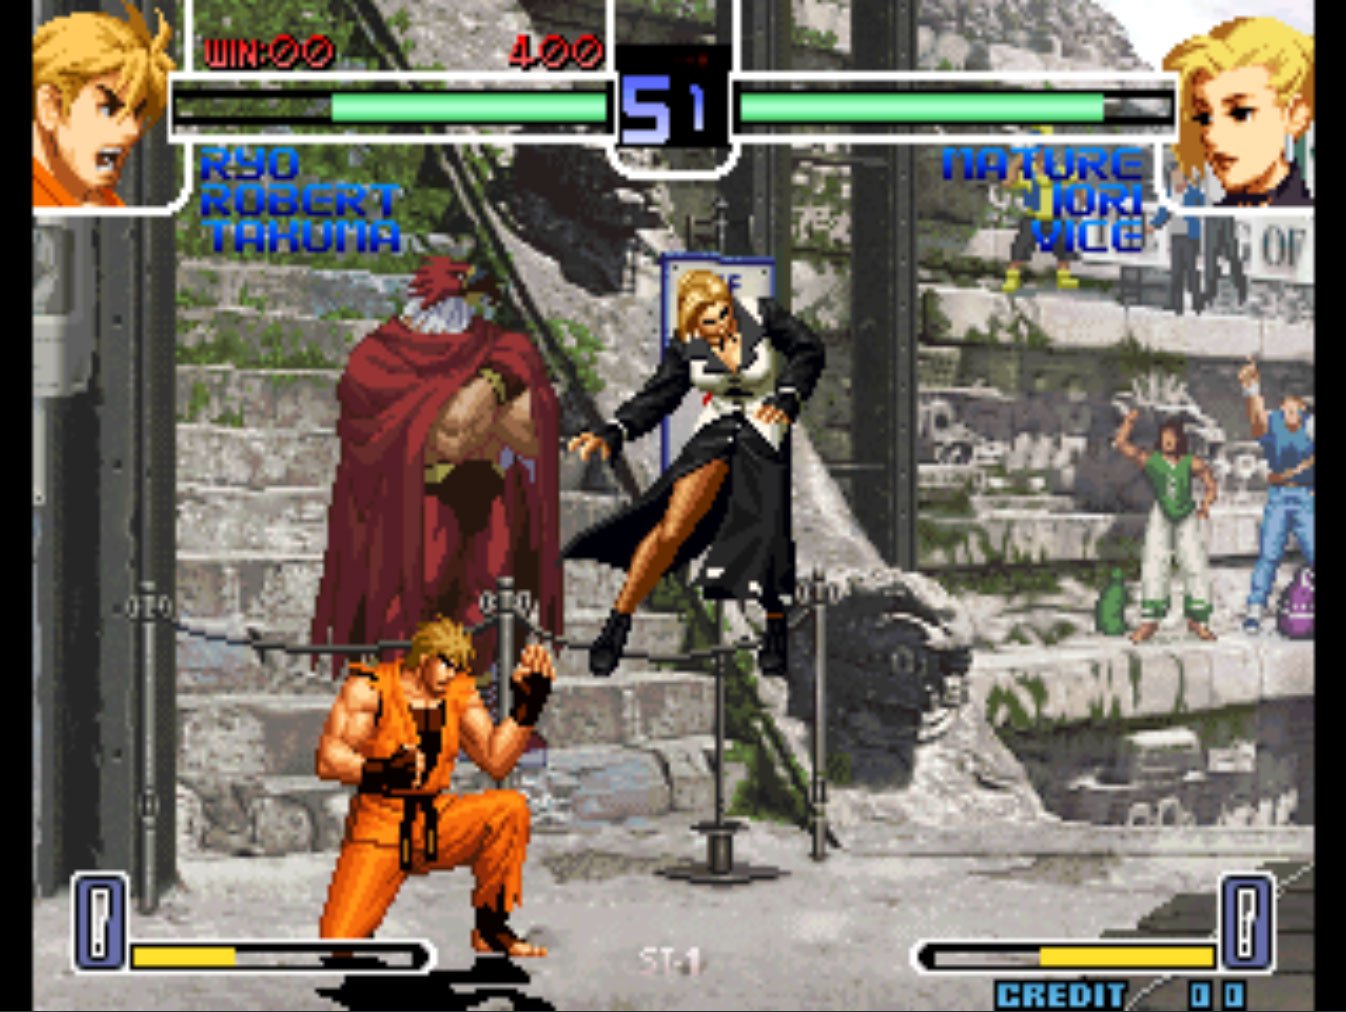 Pantallazo de King of Fighters 2002, The: Challenge to Ultimate Battle para M.A.M.E.